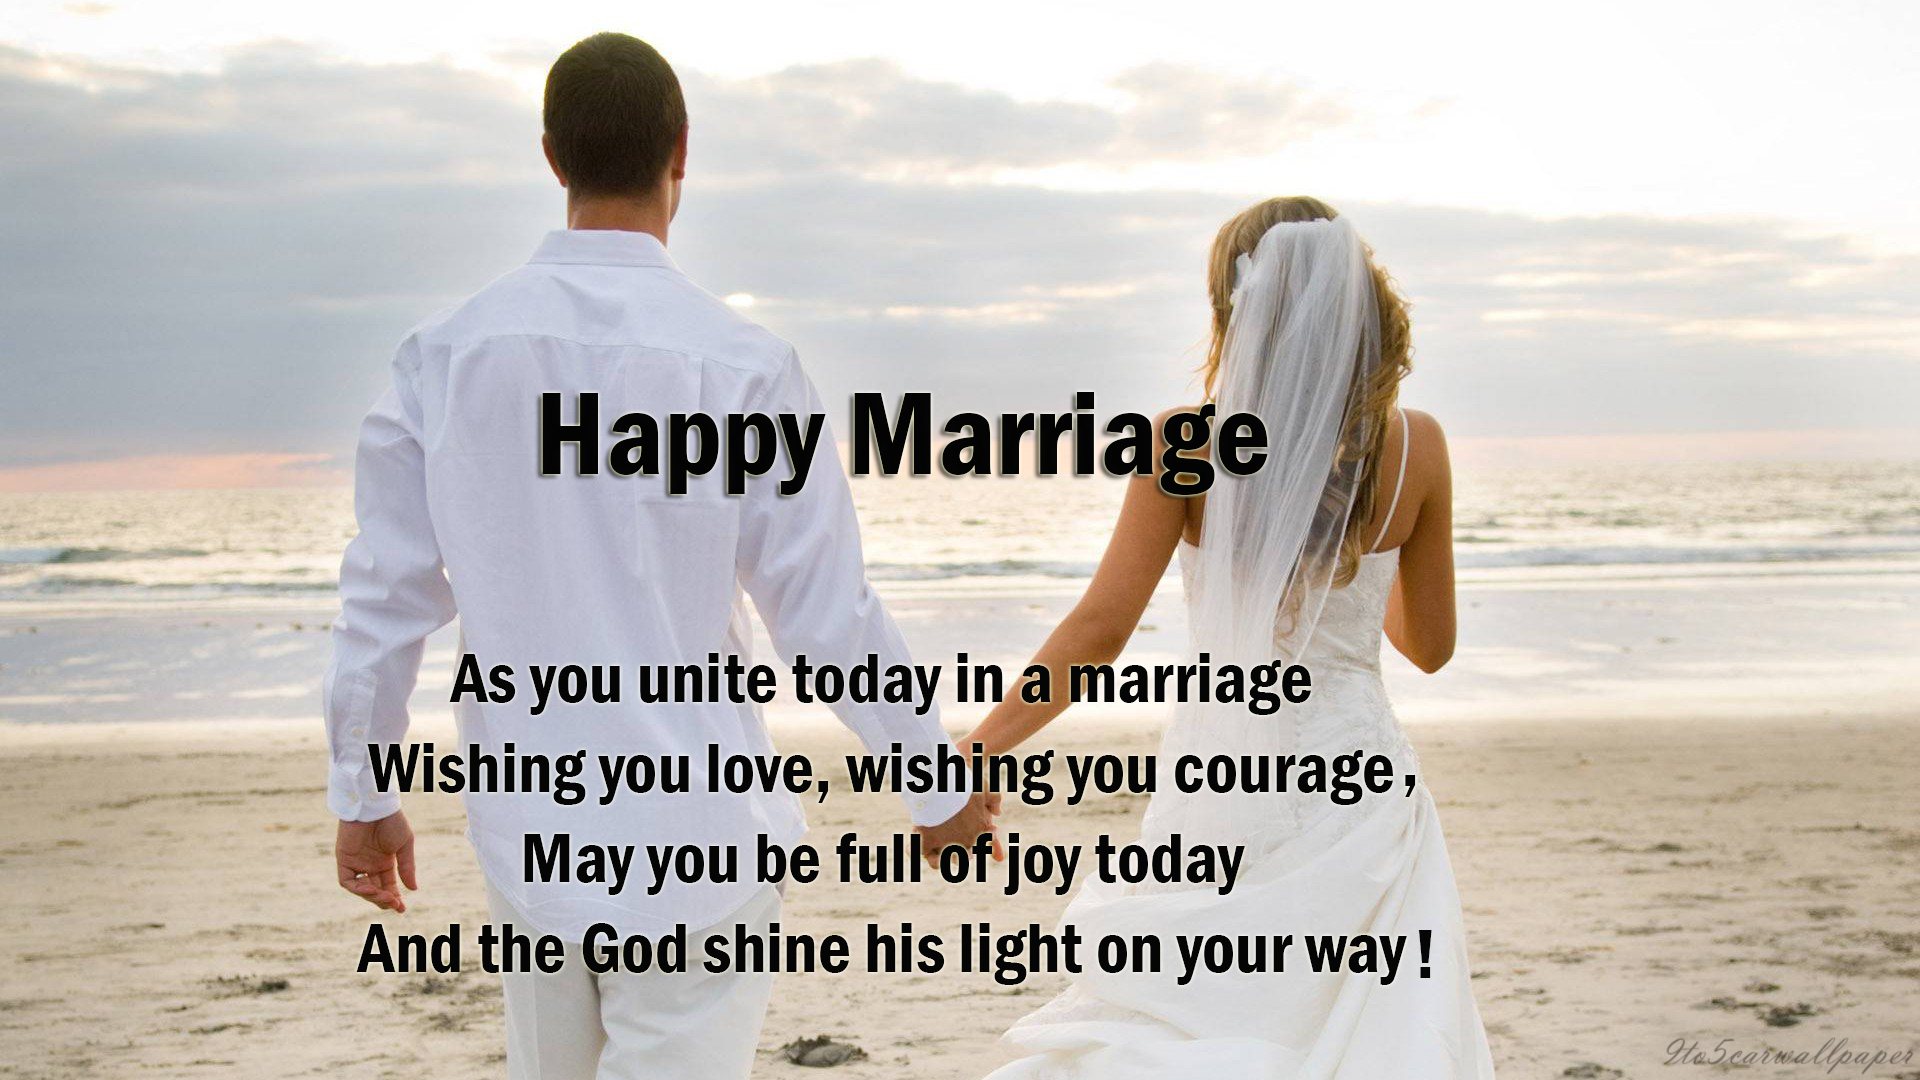 happy-marriage-quotes-images-wallpapers-cards-2017